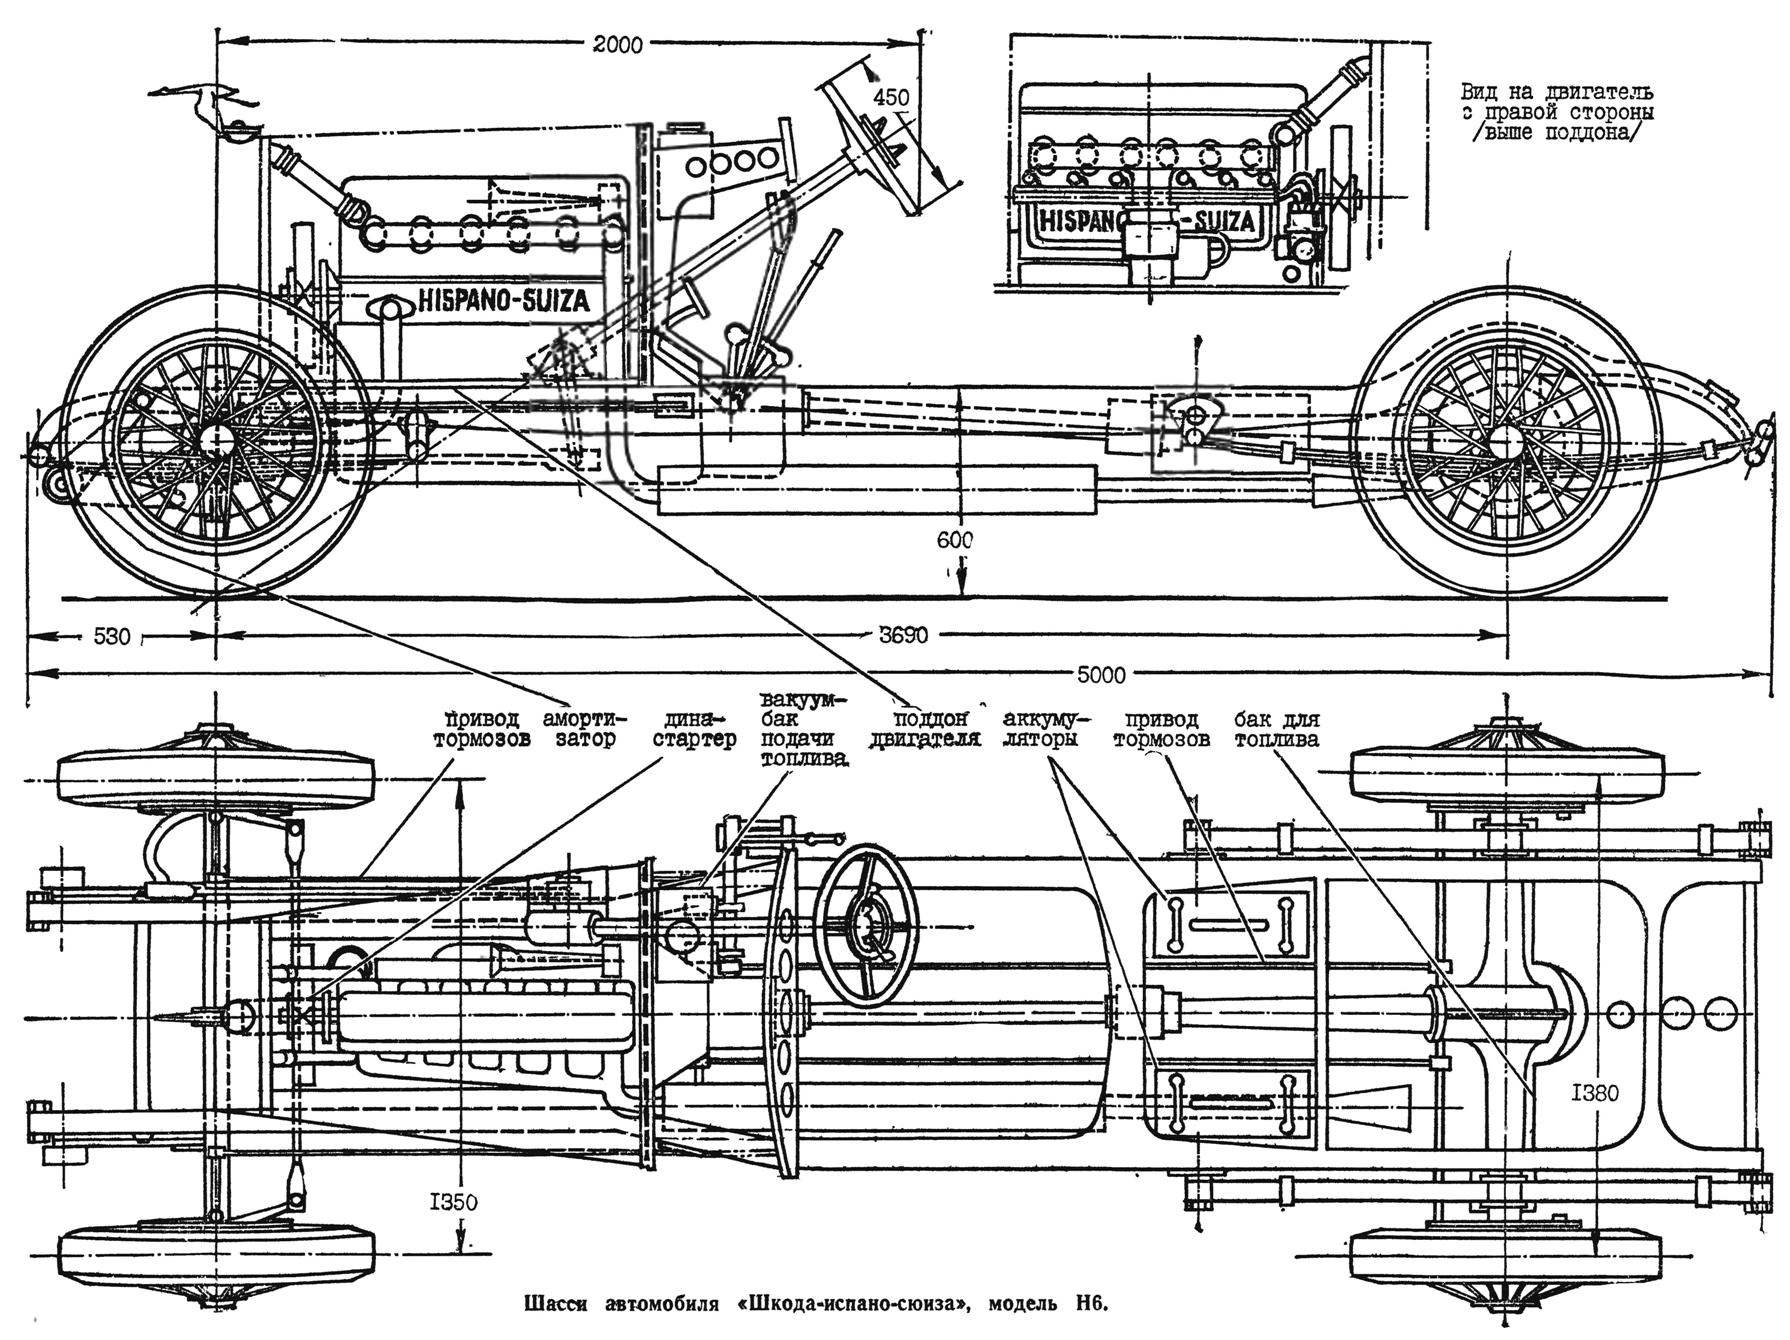 The chassis of the car 